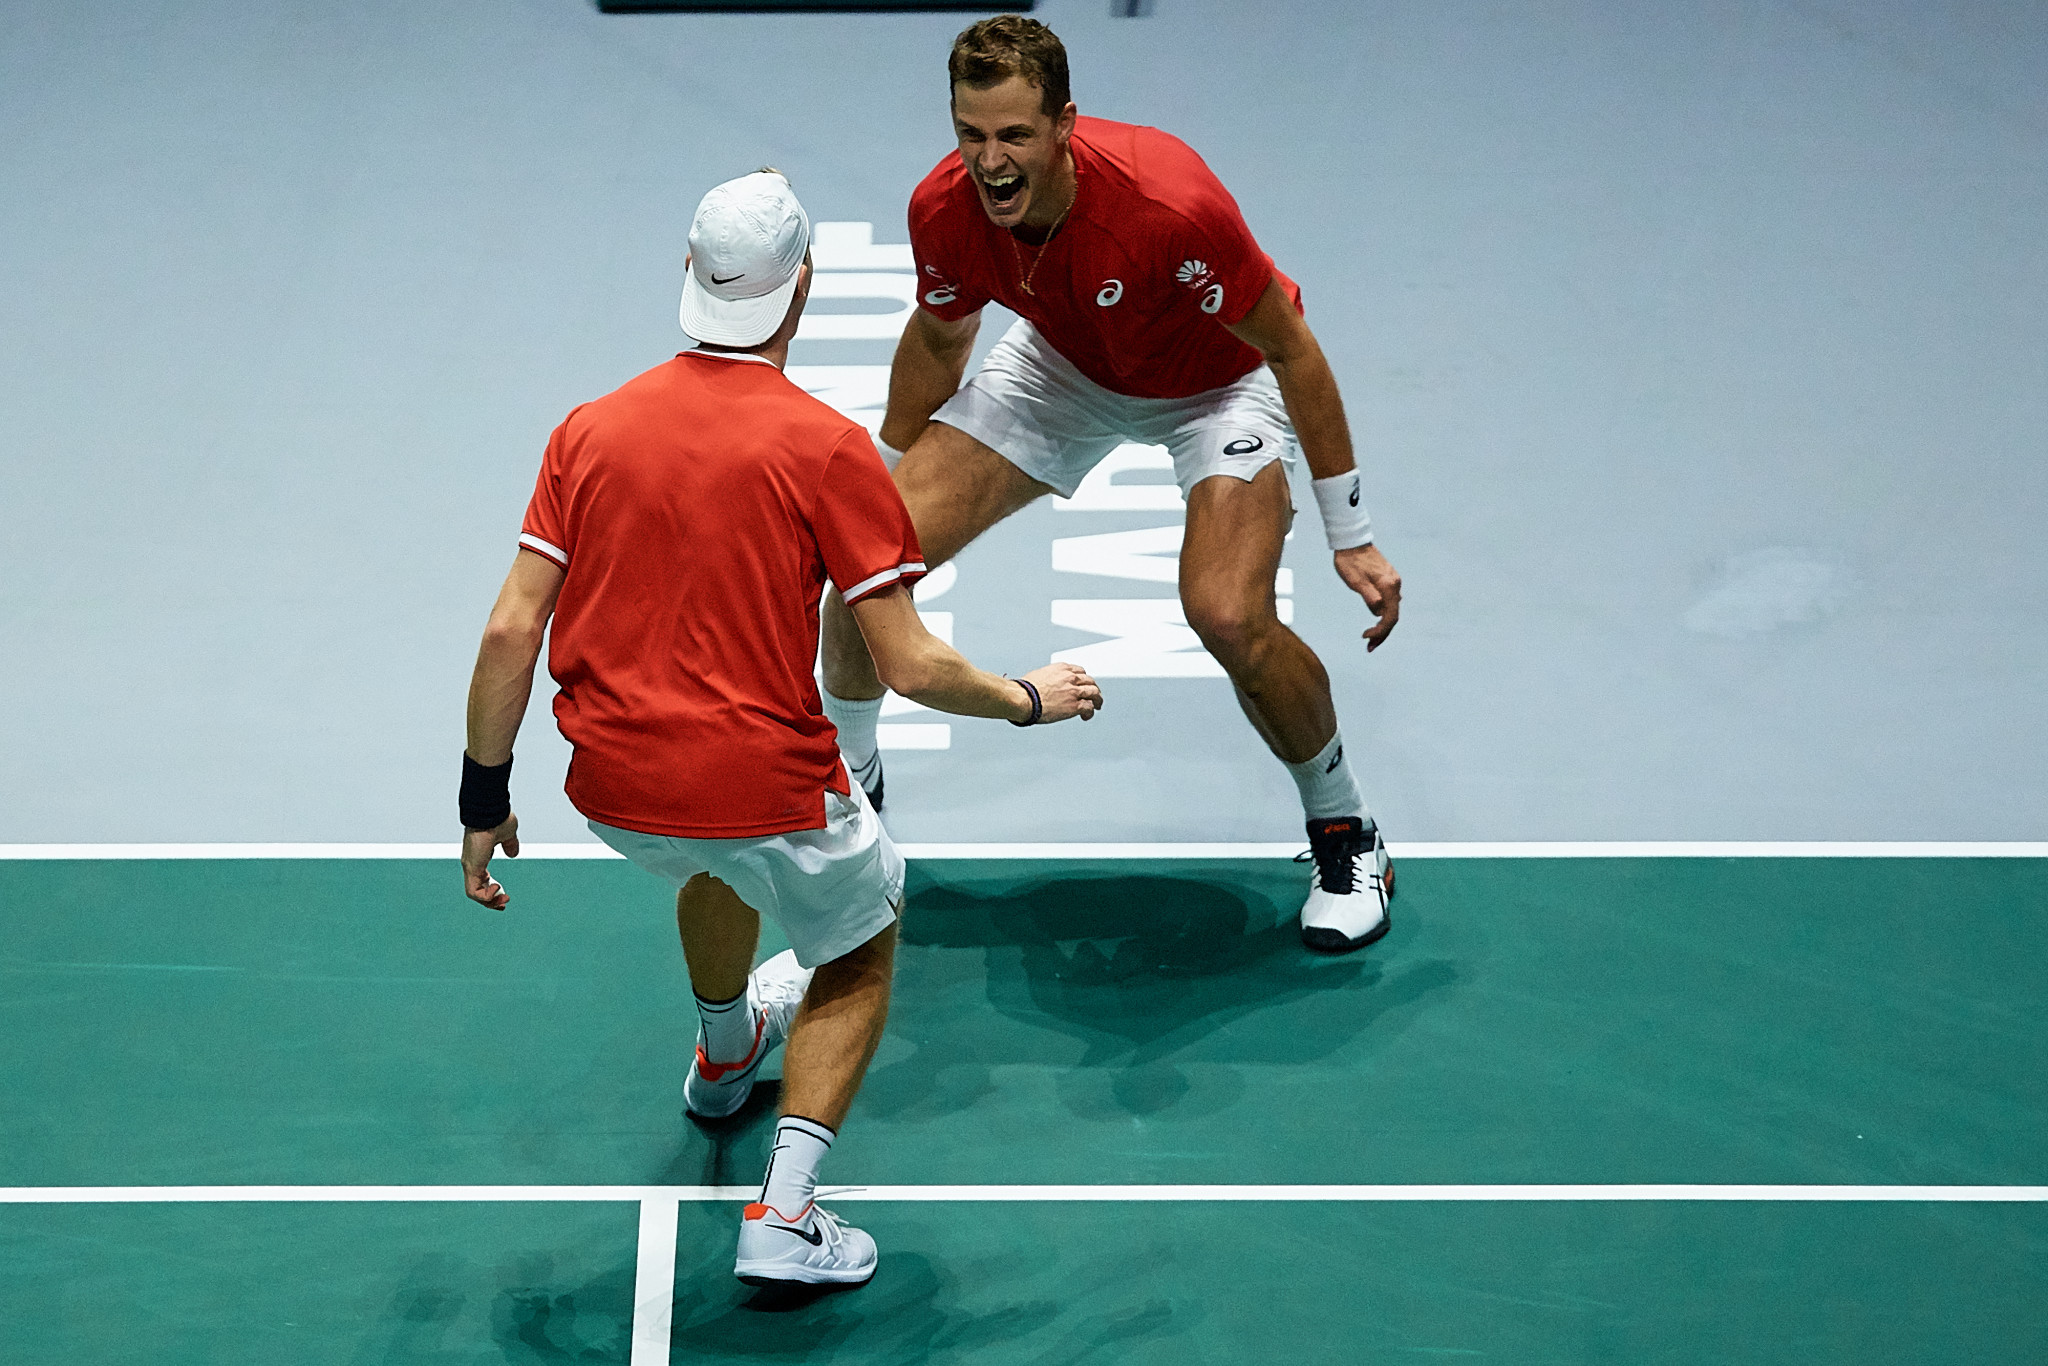 Canada reach first Davis Cup Final after beating Russia